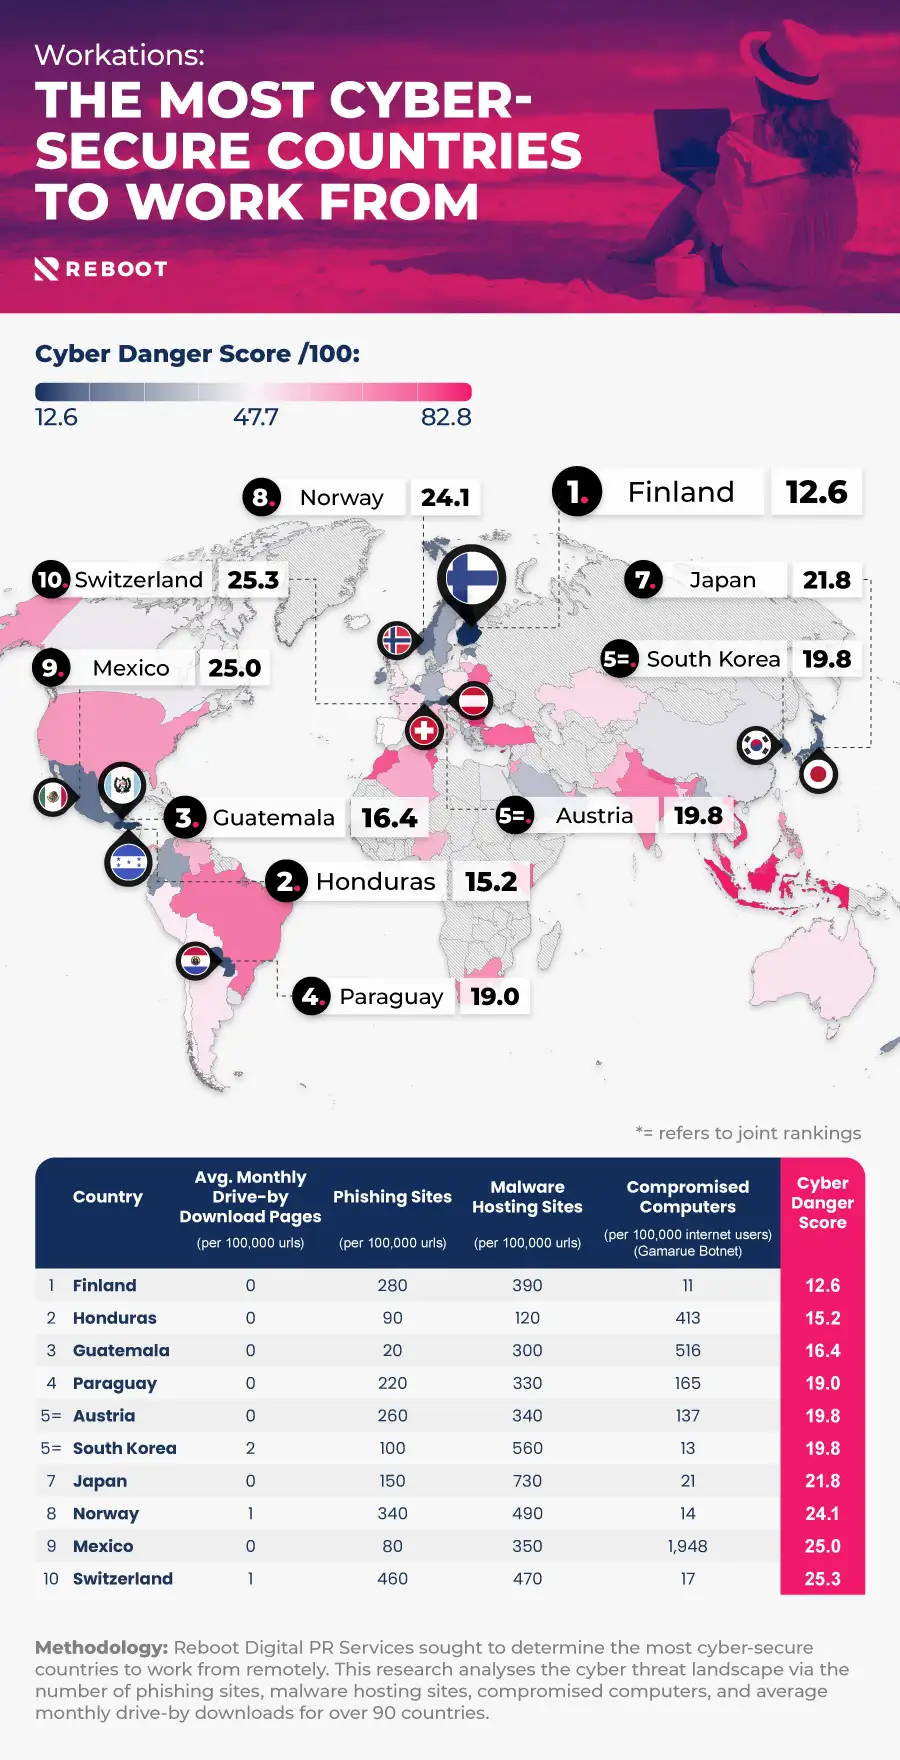 The most cyber-secure countries to work from